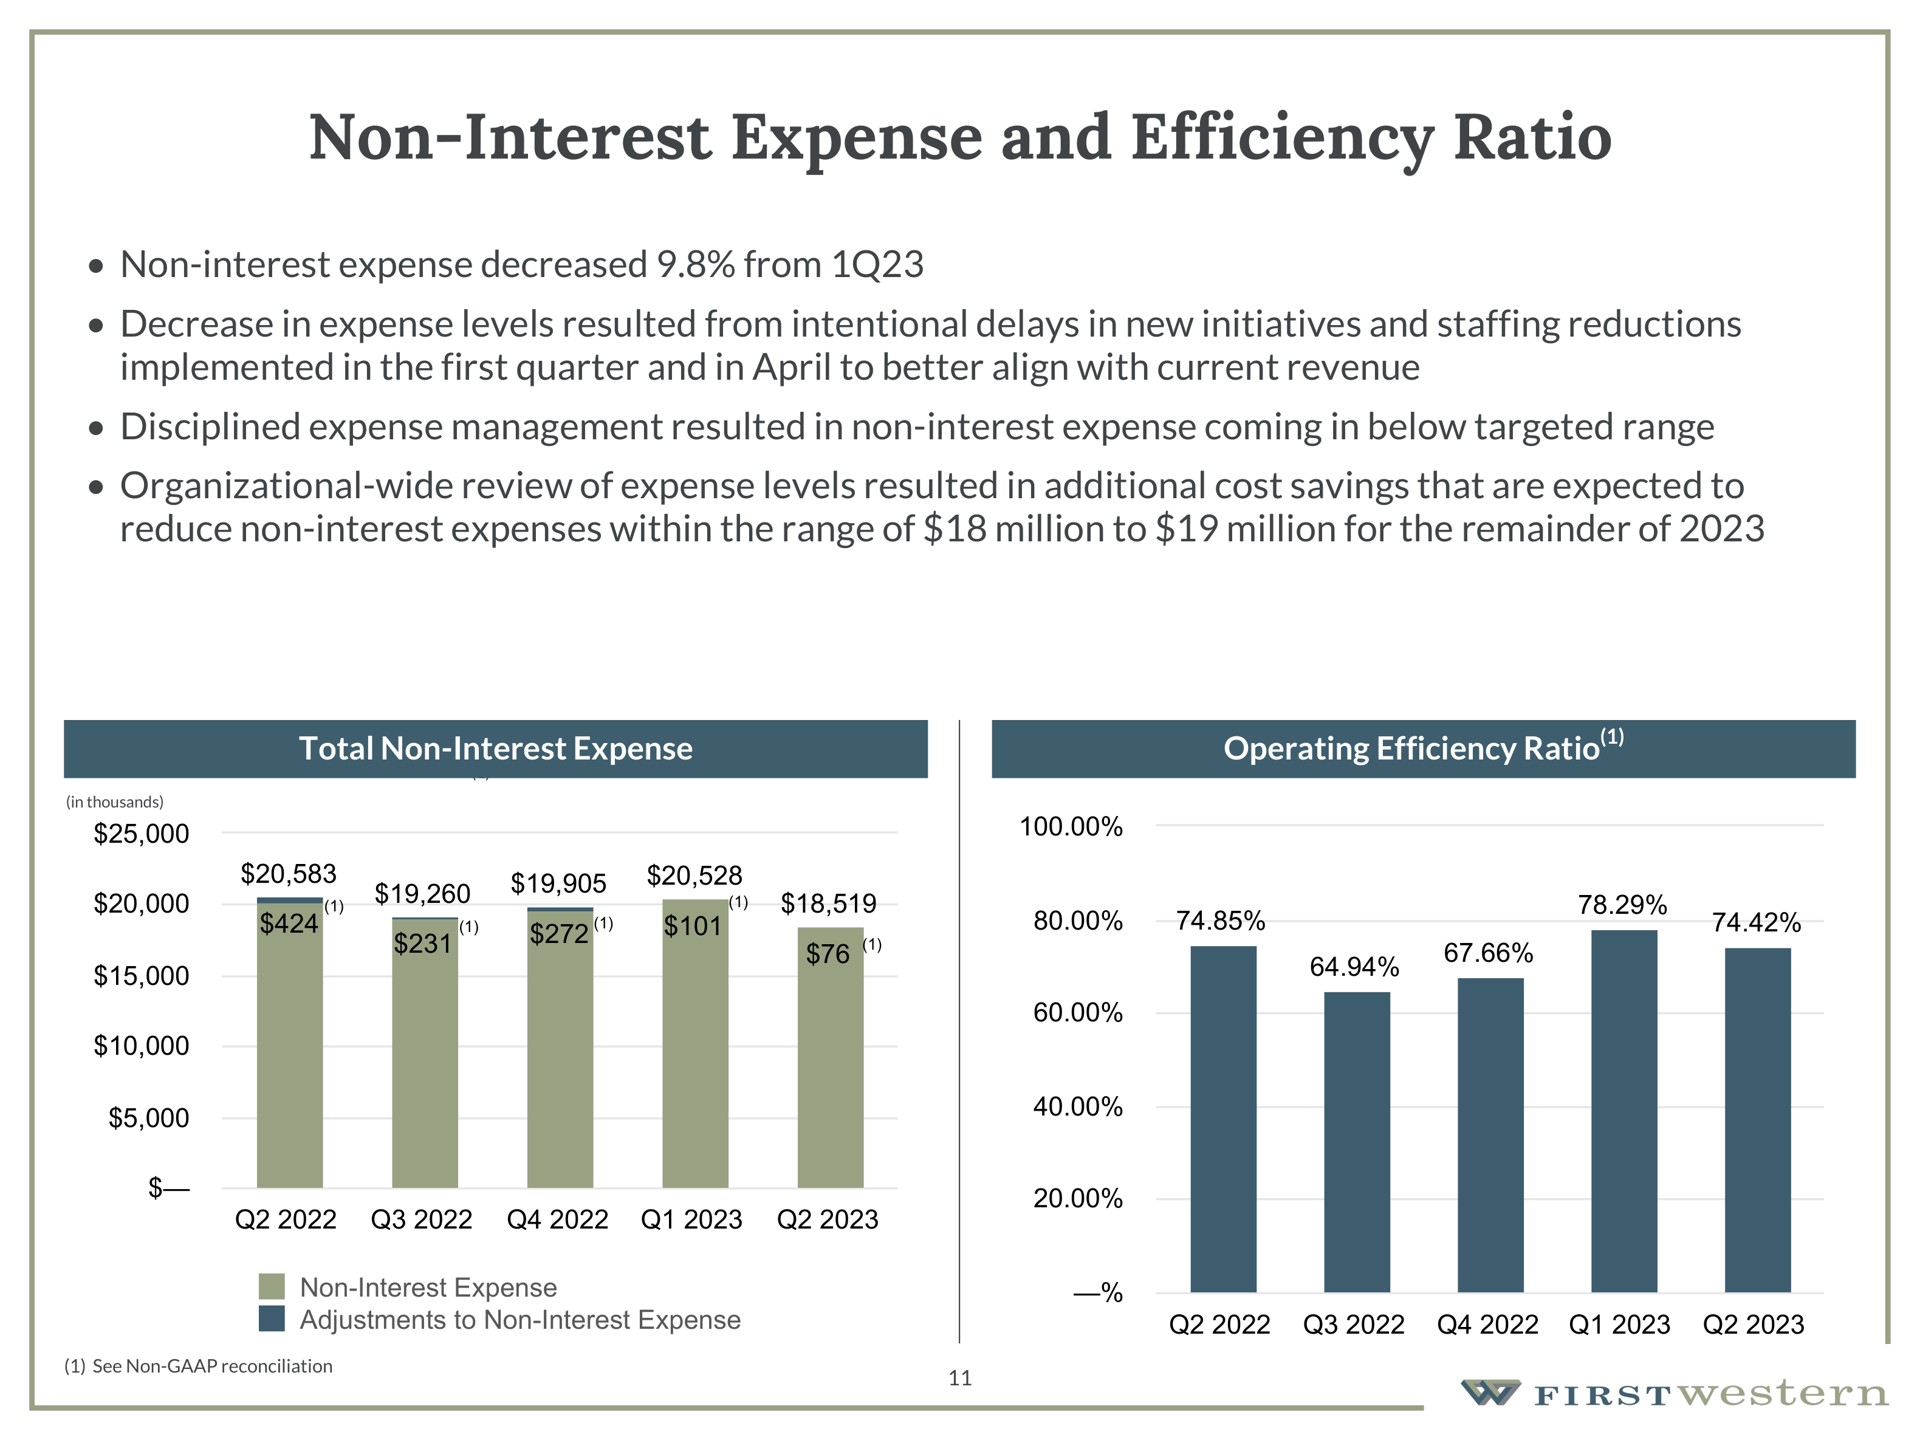 non interest expense and efficiency ratio non interest expense decreased from decrease in expense levels resulted from intentional delays in new initiatives and staffing reductions implemented in the first quarter and in to better align with current revenue disciplined expense management resulted in non interest expense coming in below targeted range organizational wide review of expense levels resulted in additional cost savings that are expected to reduce non interest expenses within the range of million to million for the remainder of total non interest expense operating efficiency ratio | First Western Financial